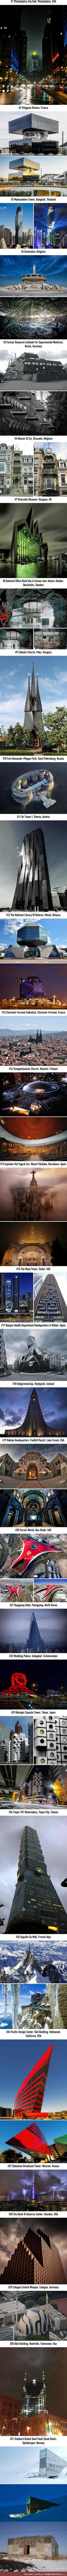 Most evil-looking buildings around the world that could easily be supervillain